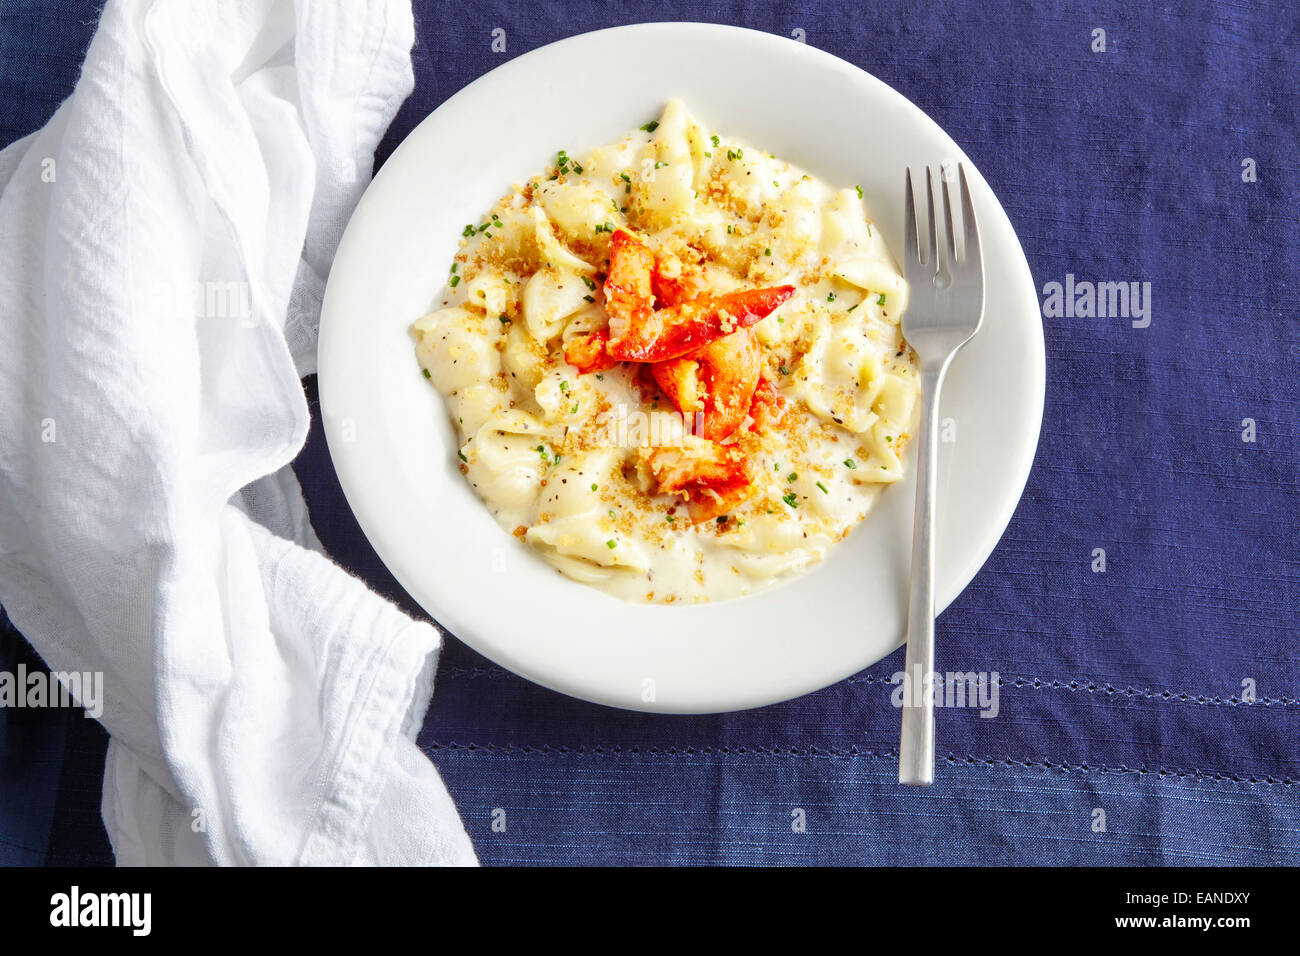 Lobster Mac and Cheese in a white plate with white napkin and dark navy table cloth Stock Photo